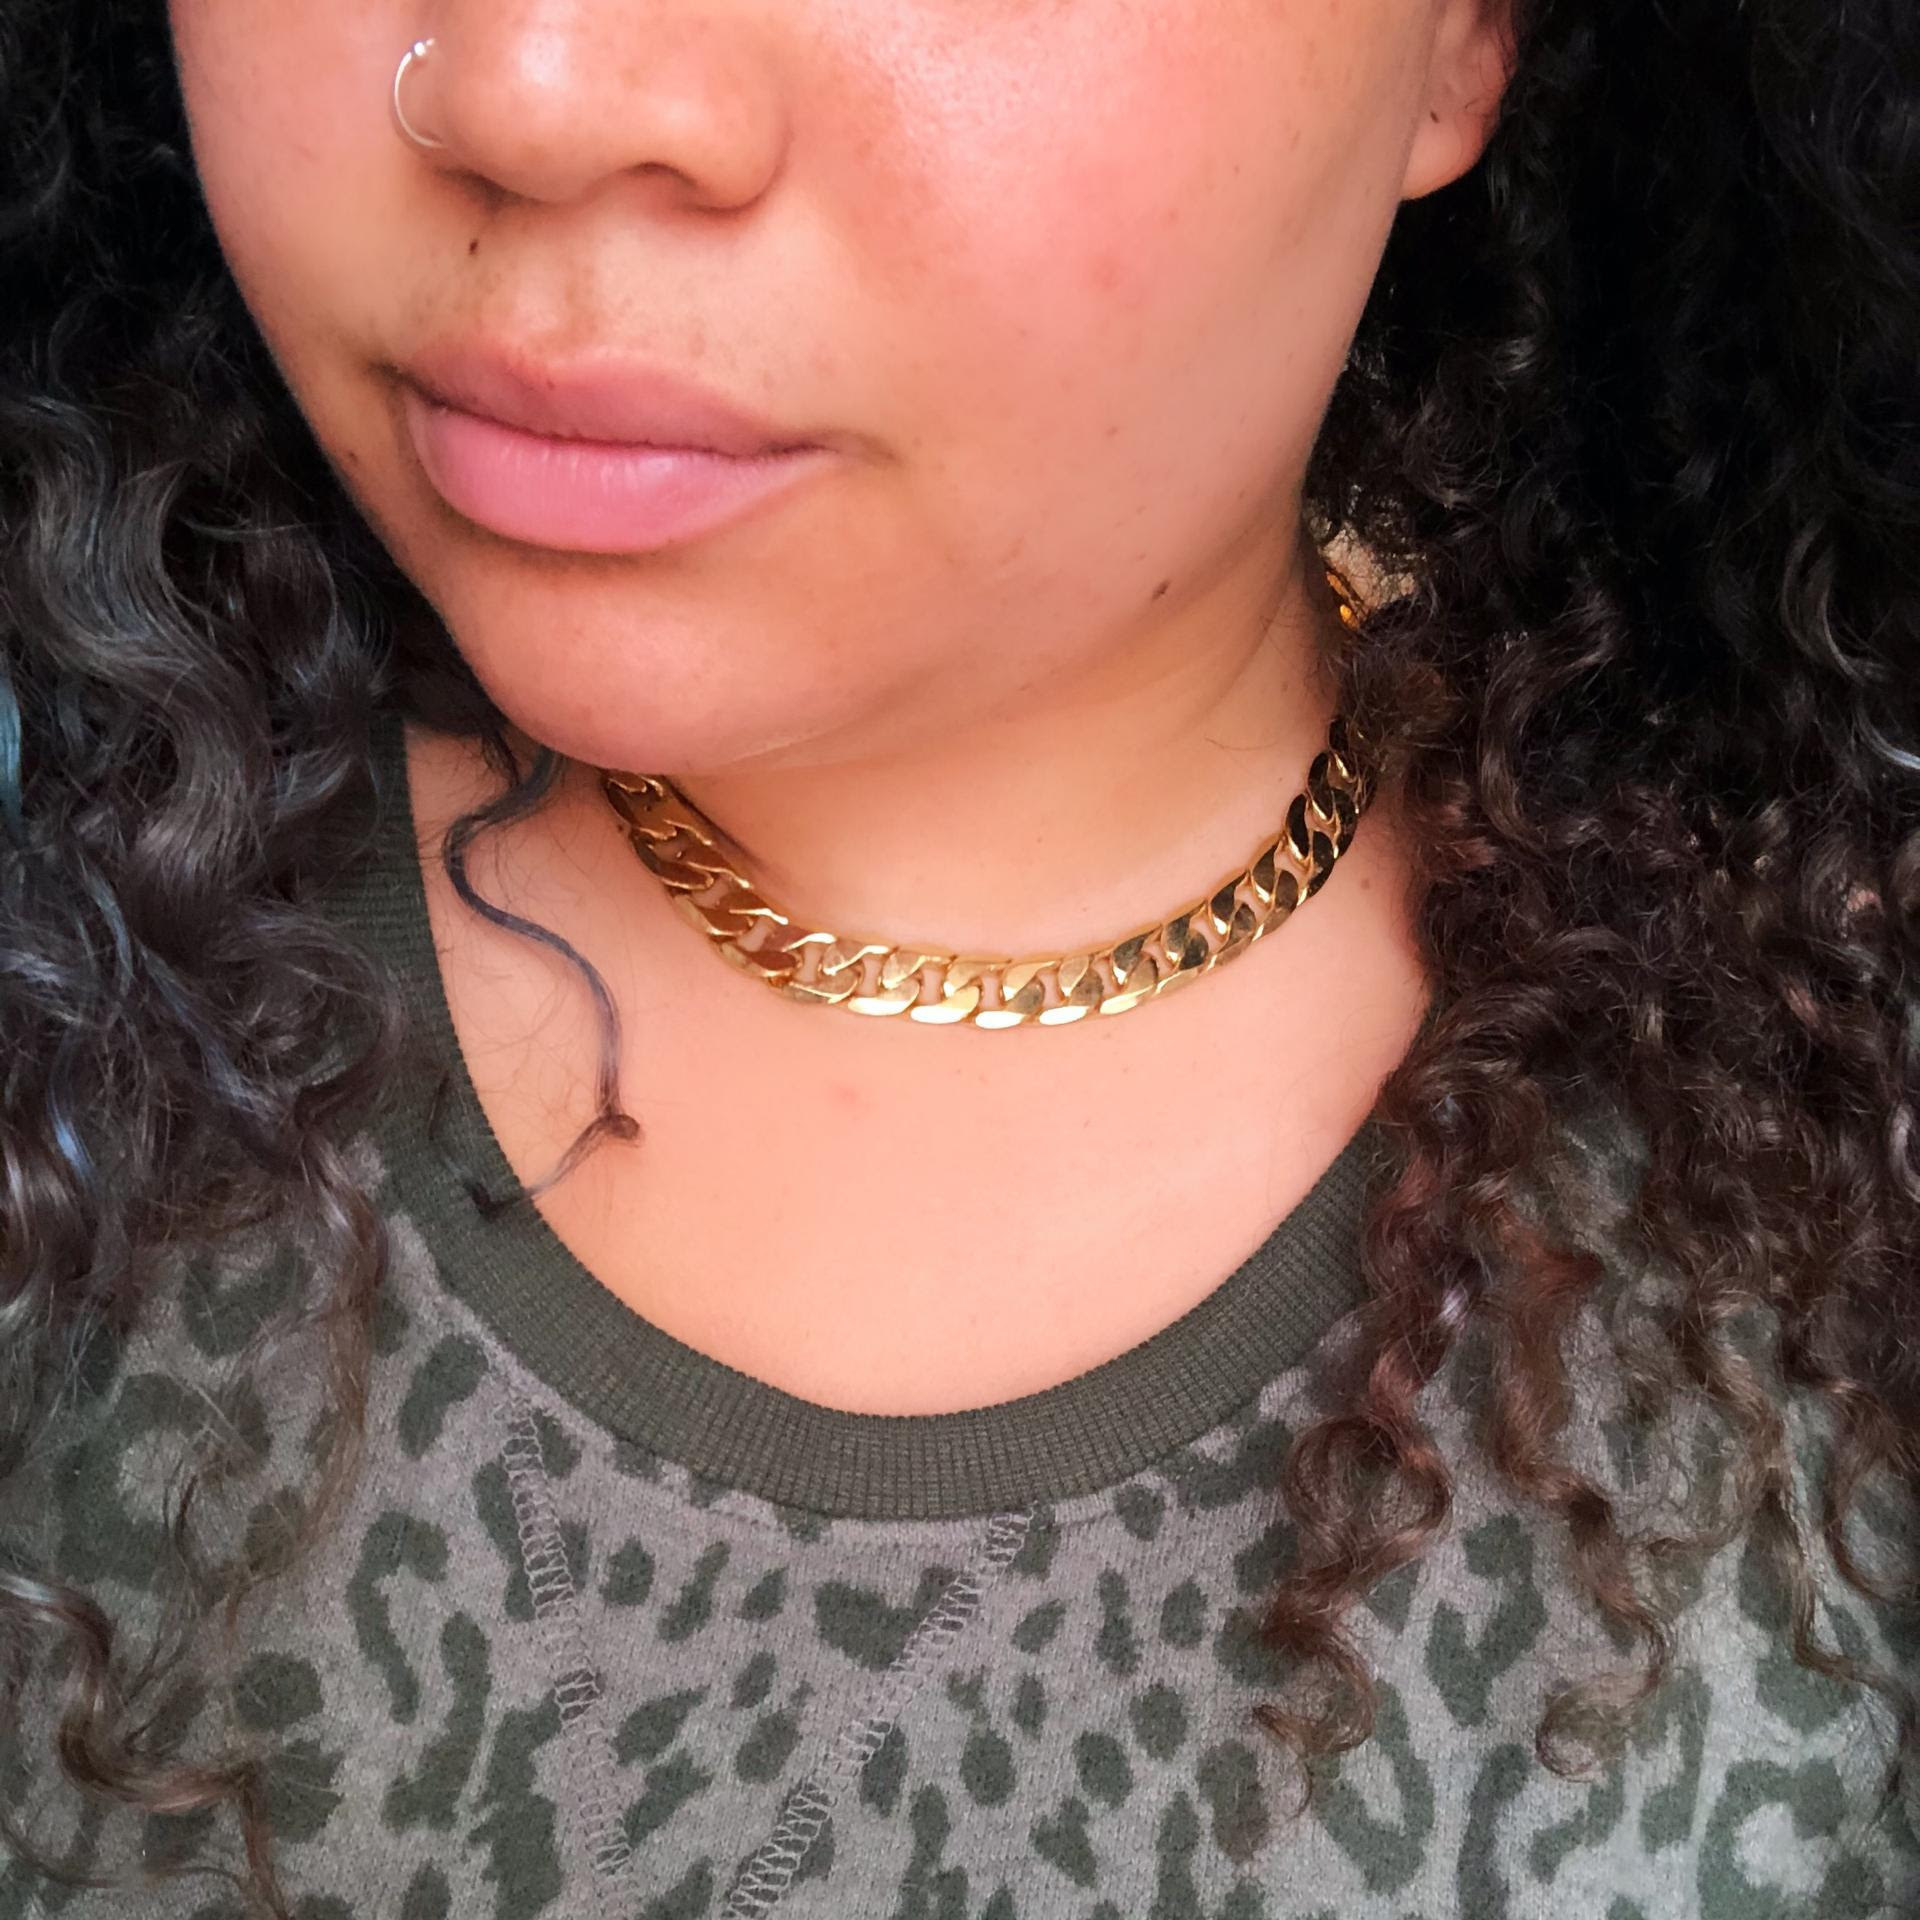 buzzfeed editor wearing a short, thick gold chain